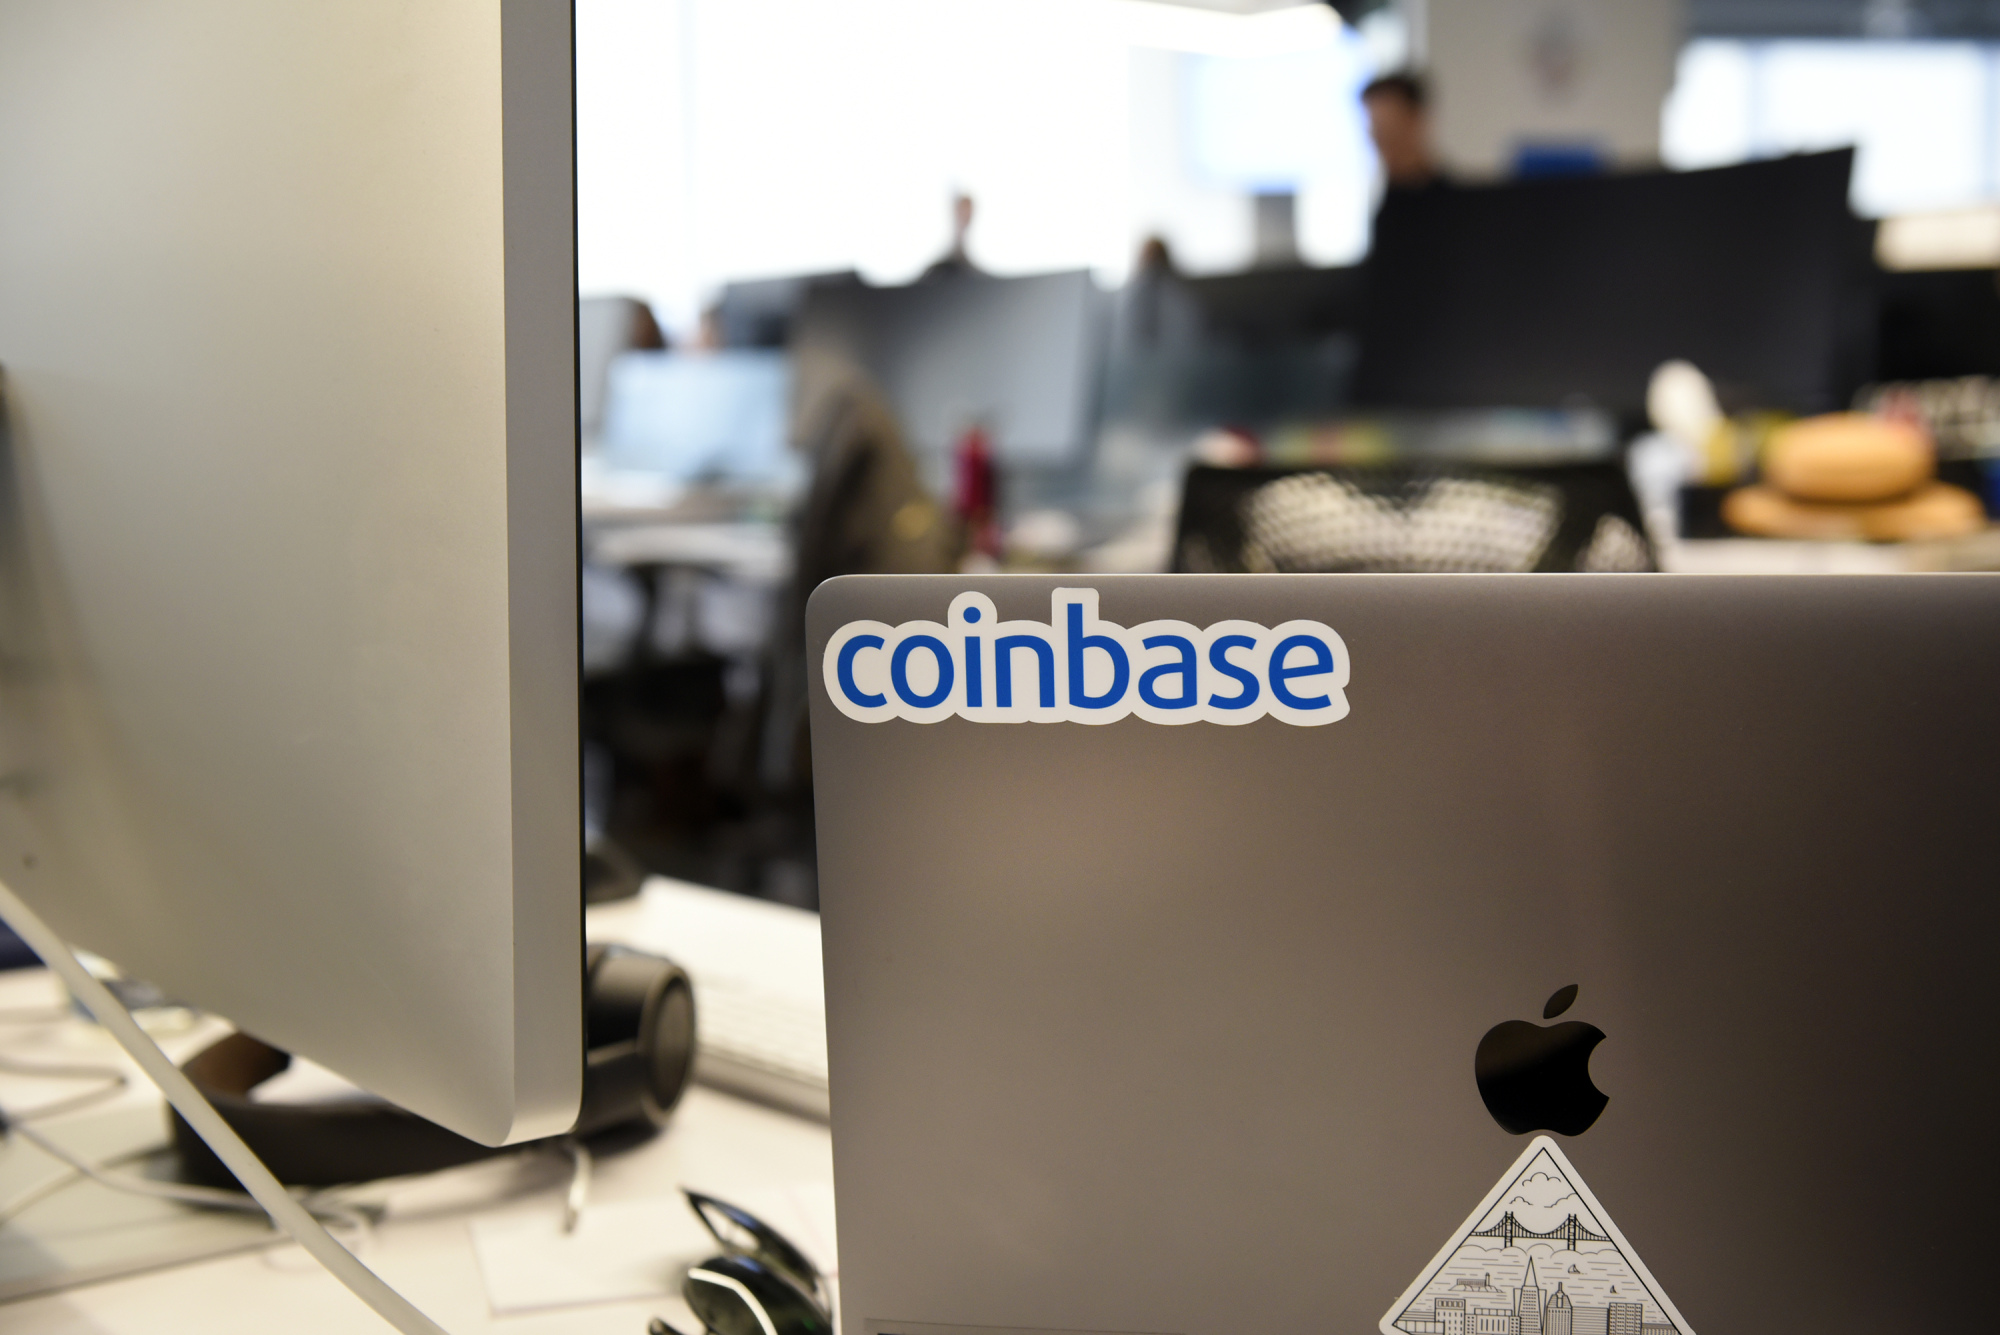 A Coinbase Inc. sticker is seen on a laptop computer at the company's office in San Francisco, California, U.S.